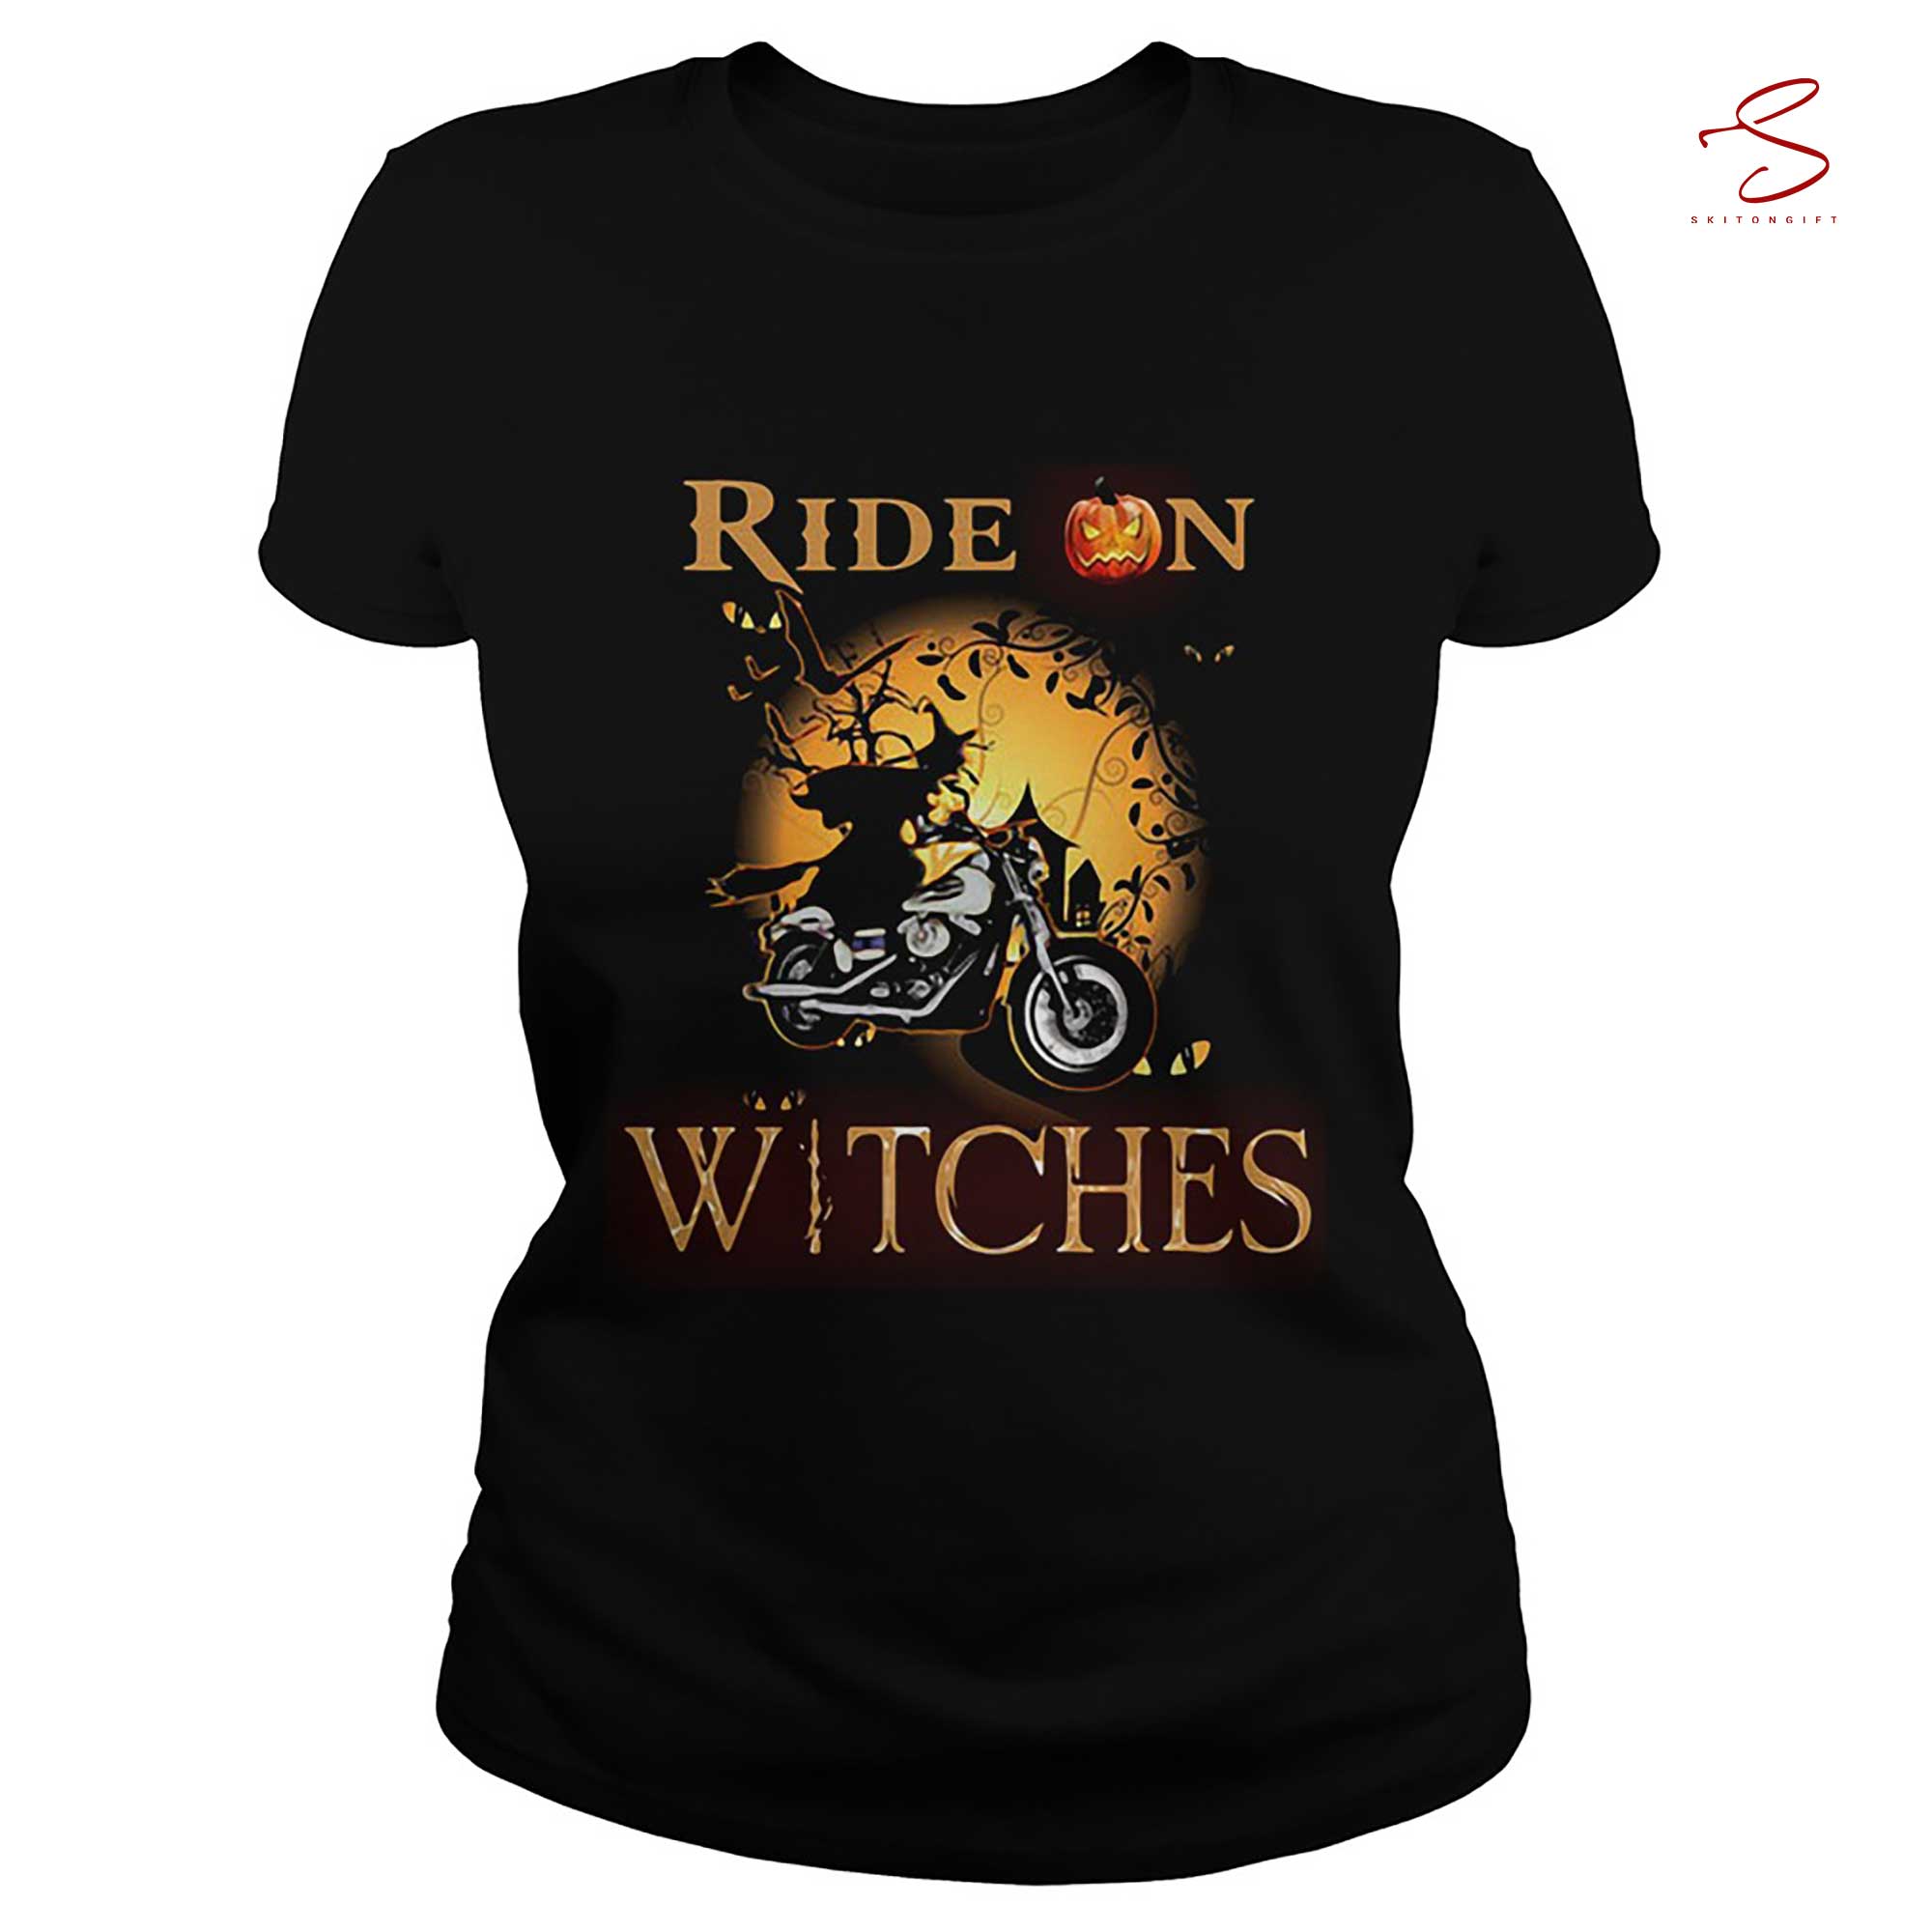 Skitongift Ride On Witches Motorcycle Halloween T Shirt